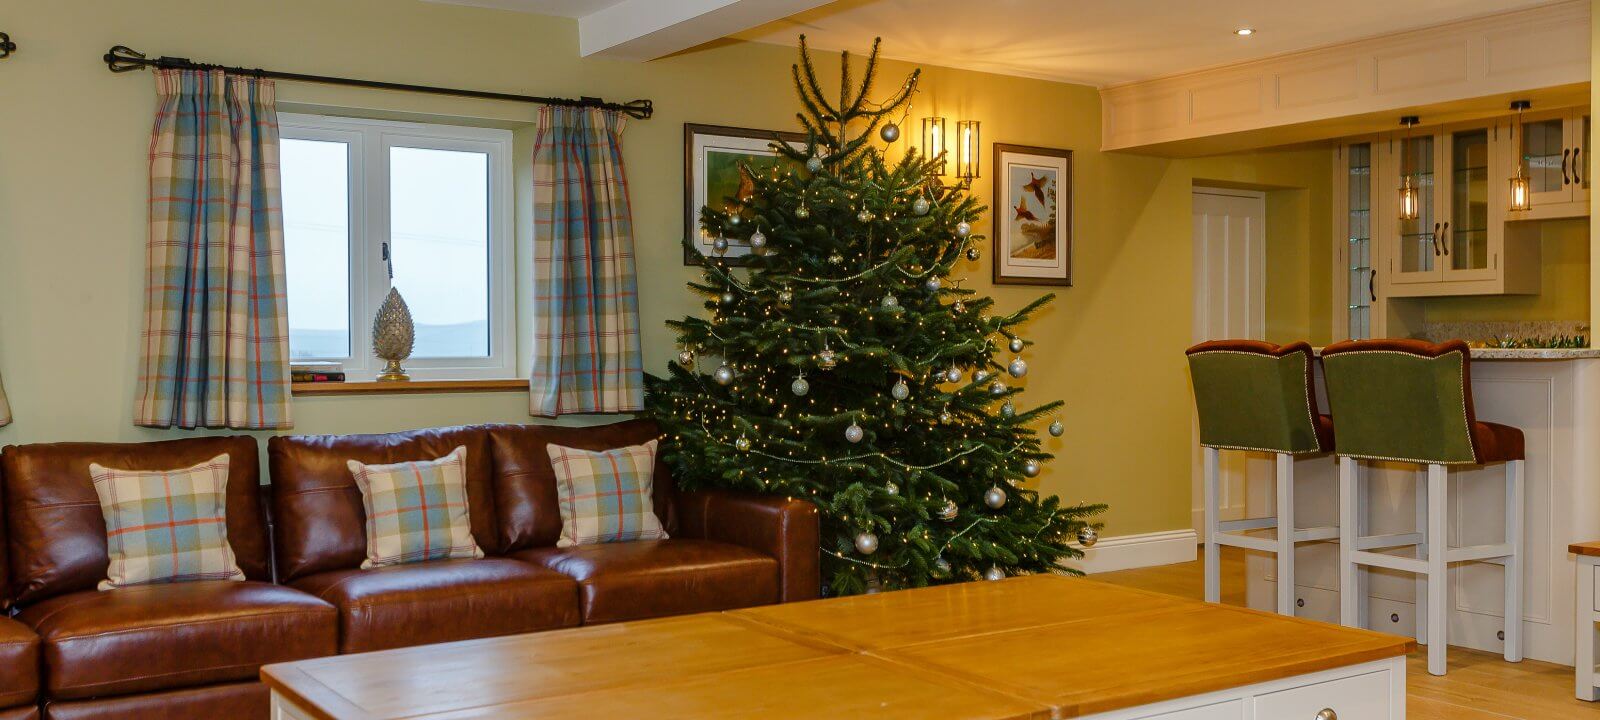 Christmas tree in lounge showing bar area